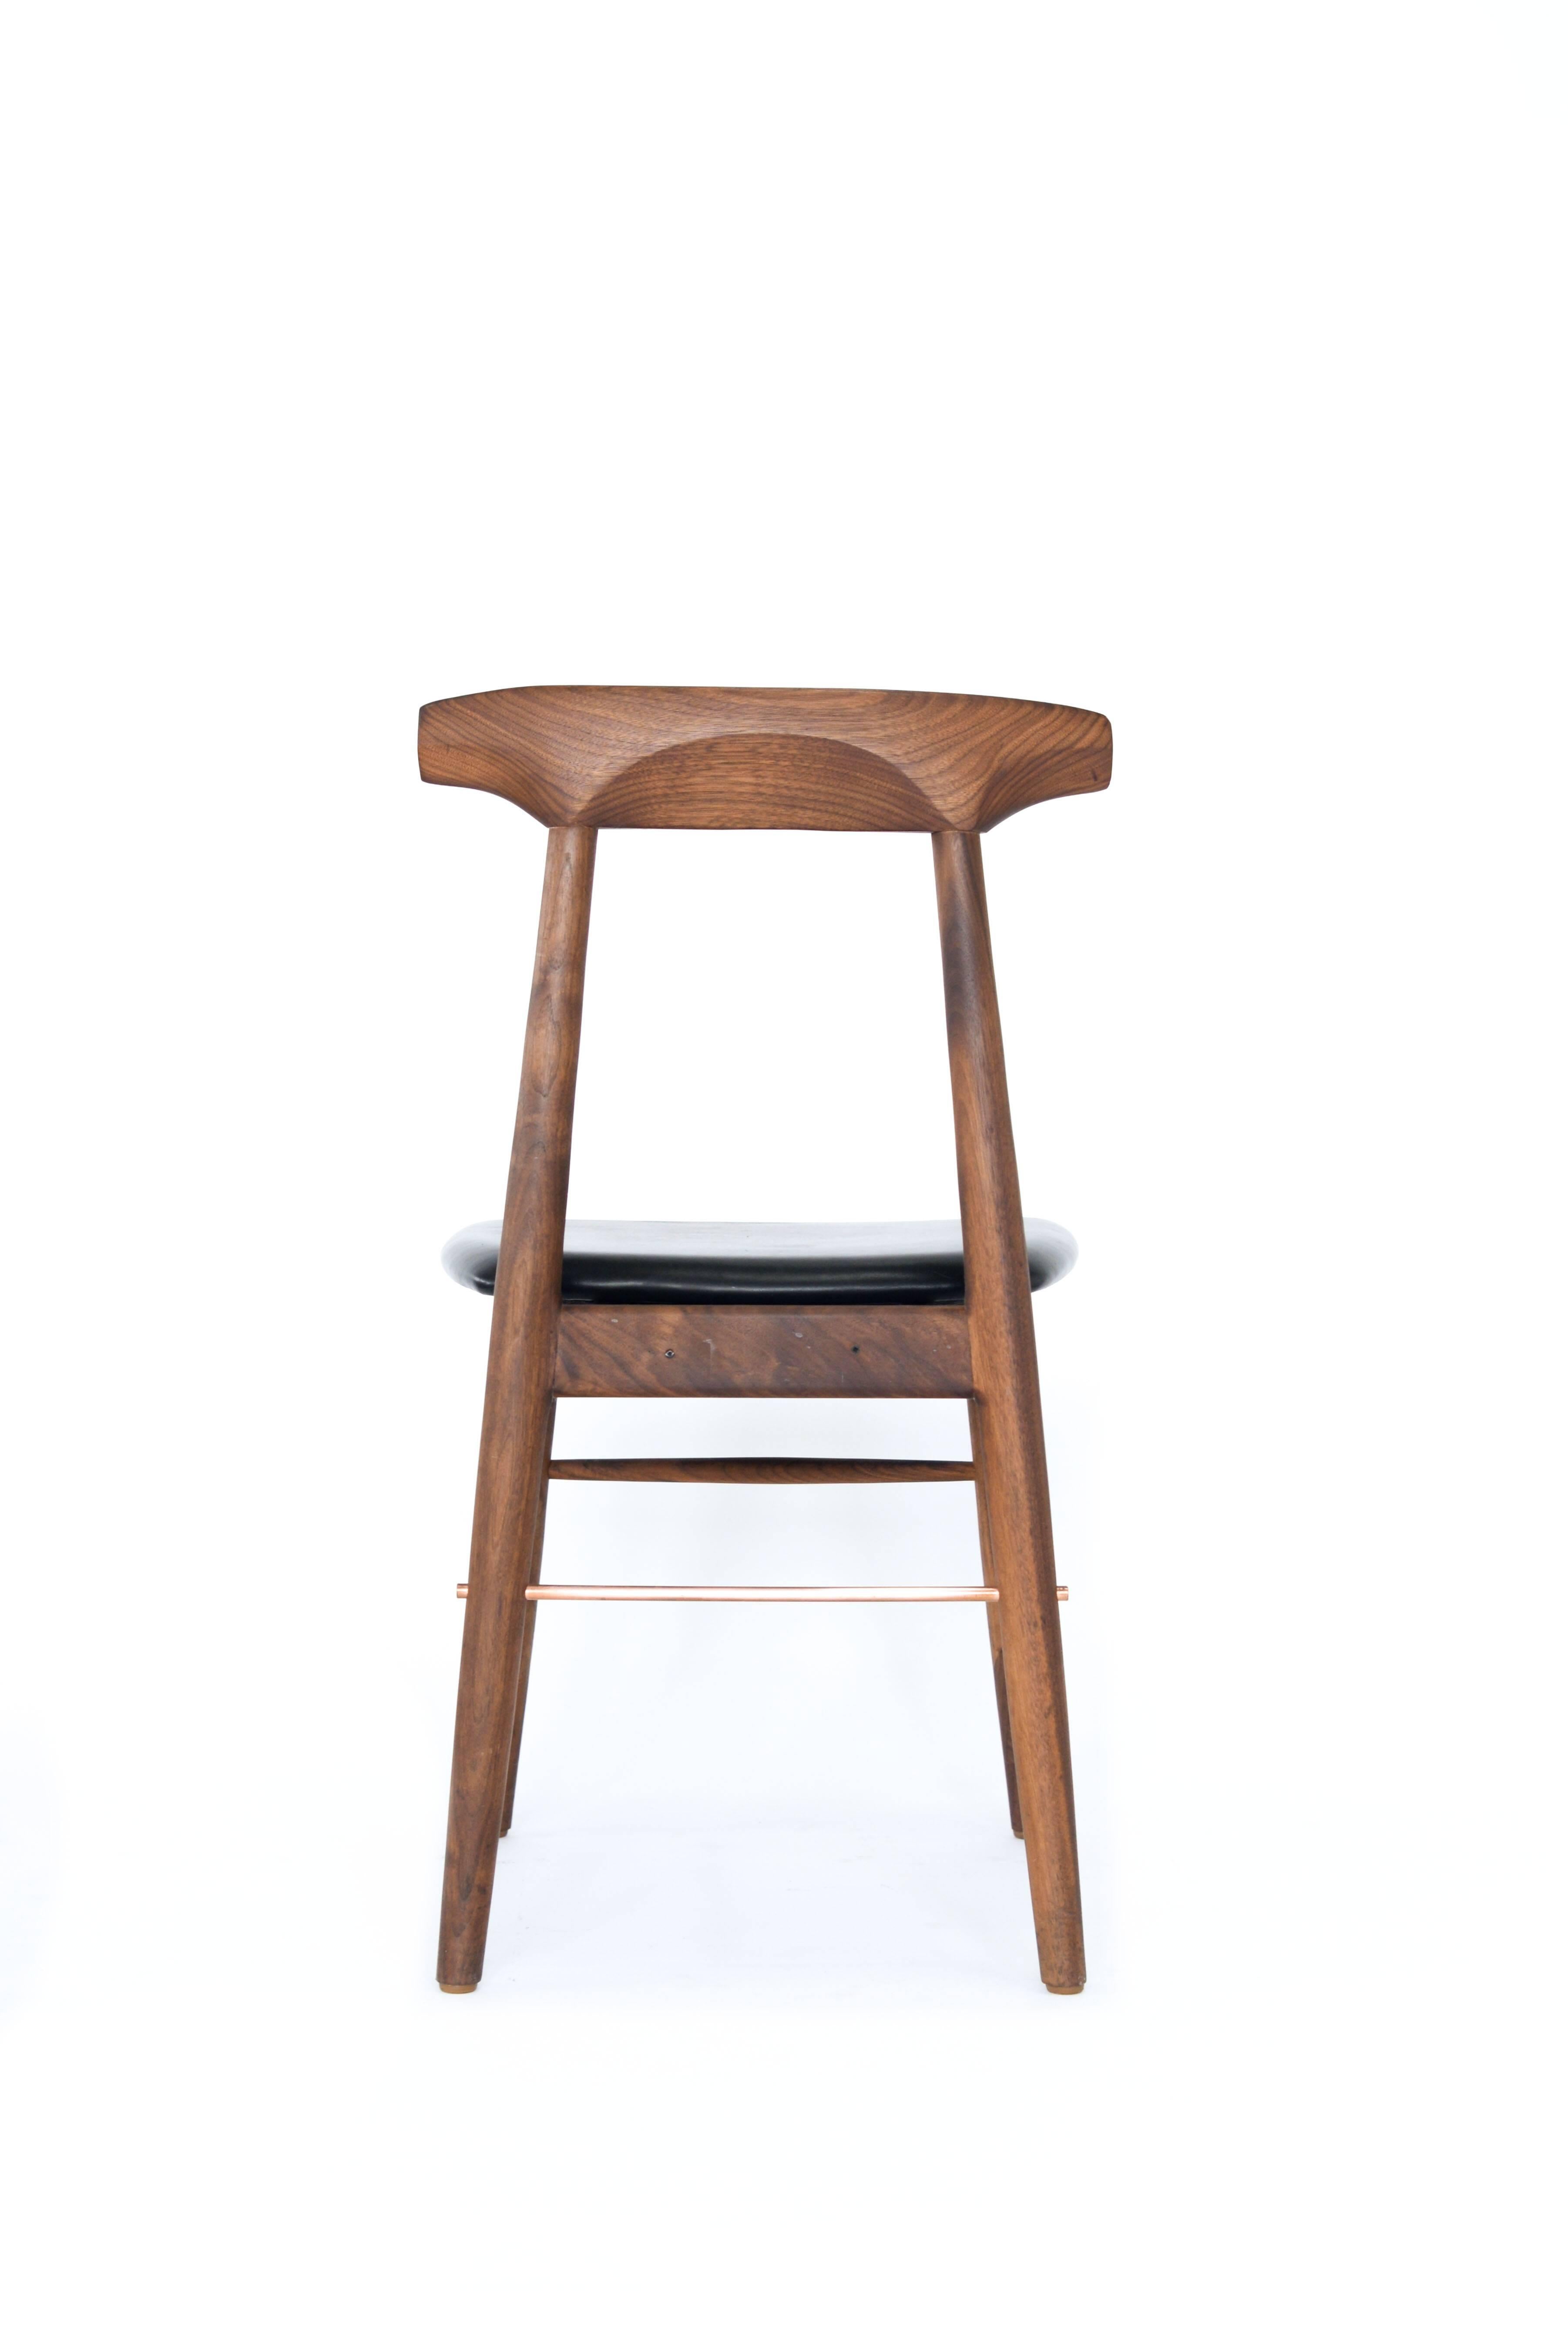 Handcrafted solid wood construction, featuring true copper or brass rods. Made in Los Angeles, California. Shown in walnut, copper, and black leather upholstery.

Wood type is available in ebonized oak, white oak, solid walnut, maple, ash, and any